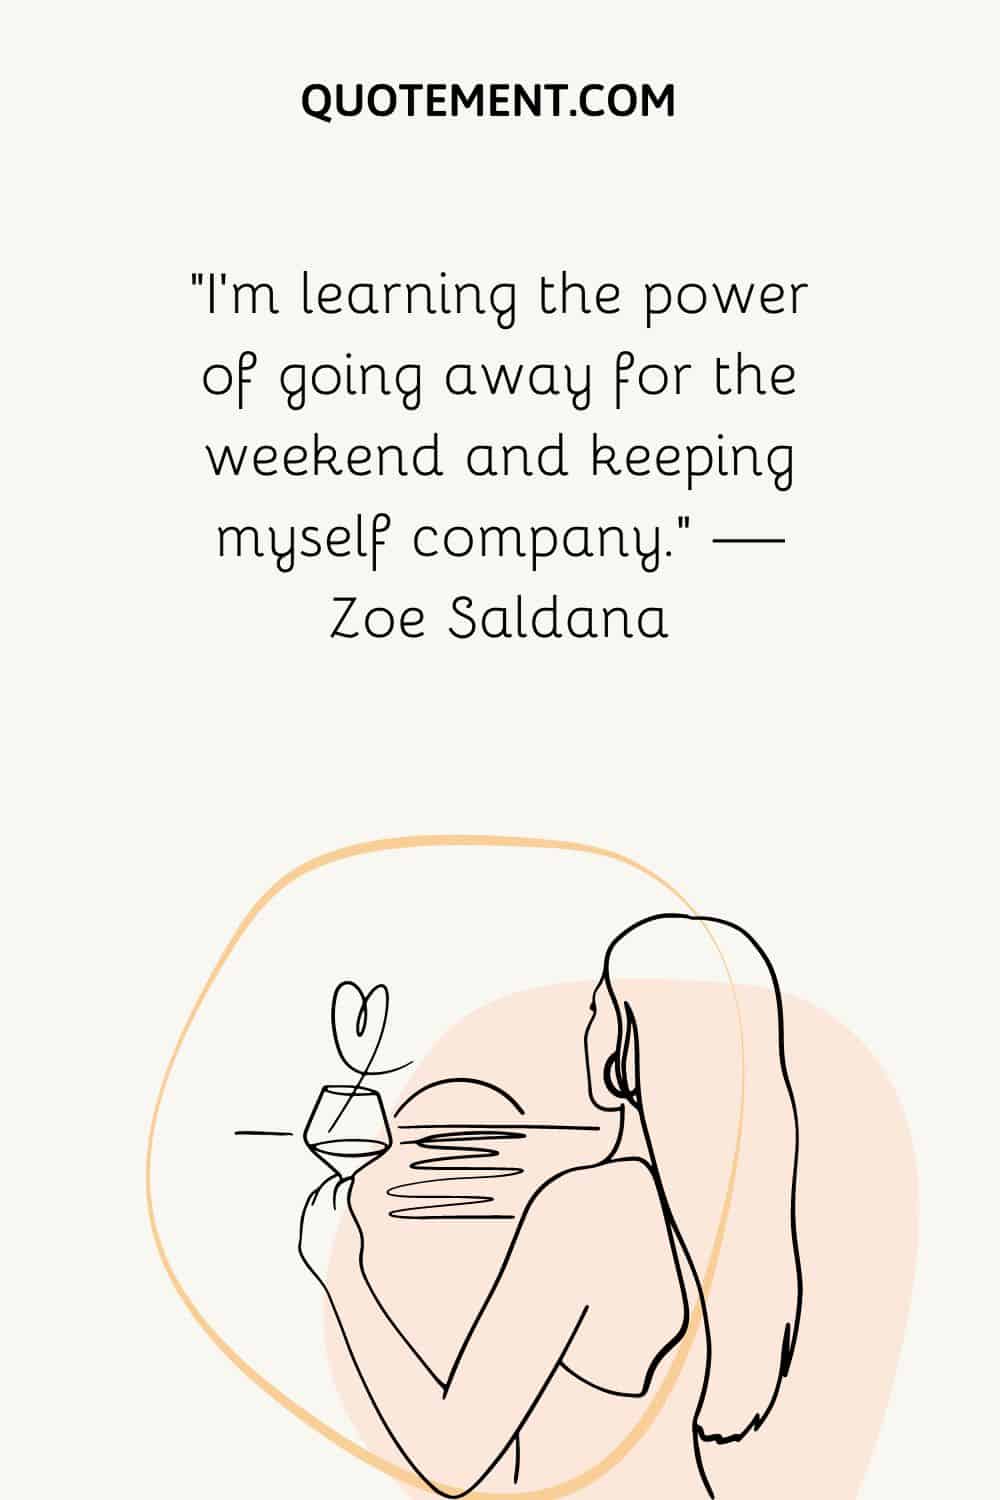 “I’m learning the power of going away for the weekend and keeping myself company.” — Zoe Saldana